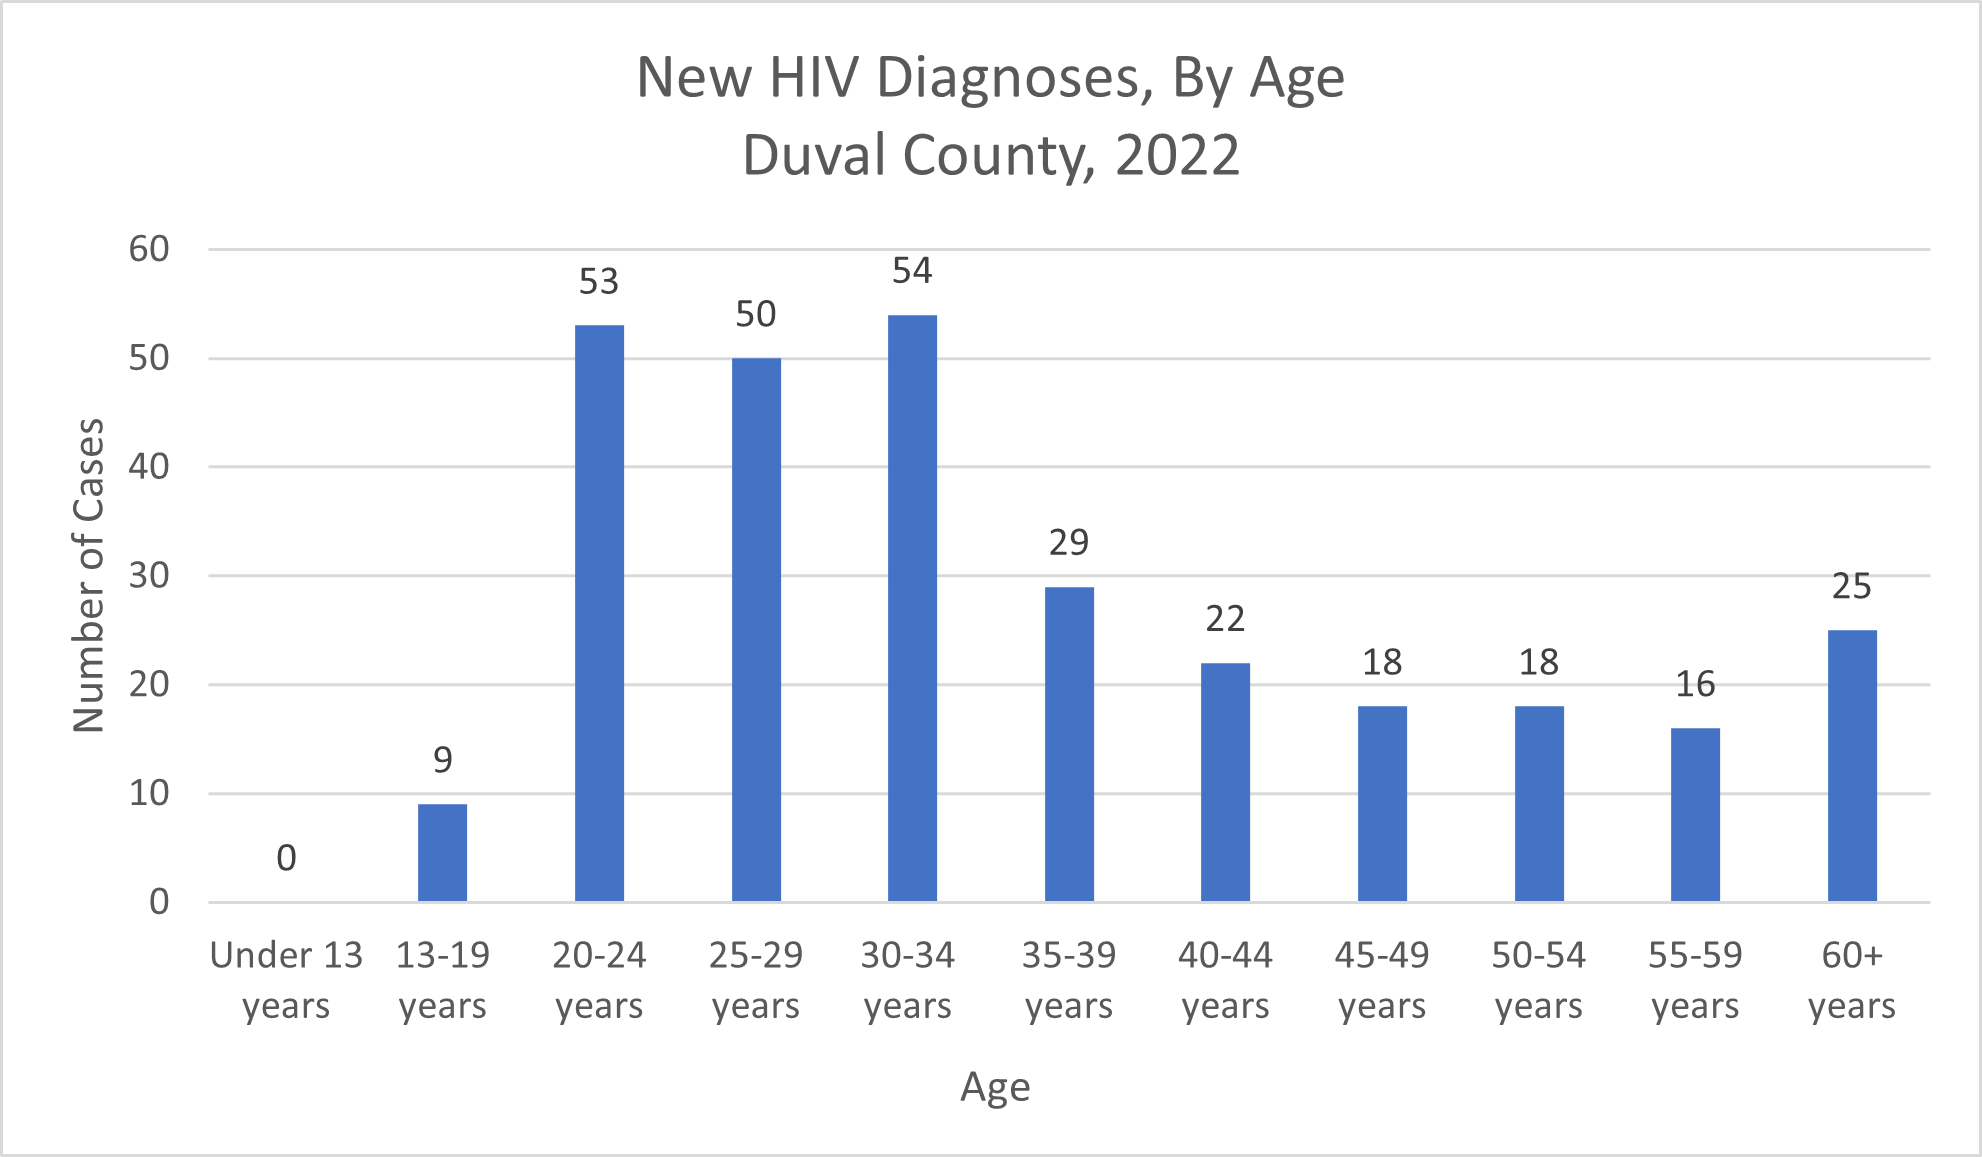 New HIV Diagnoses, By Age Duval County, 2022